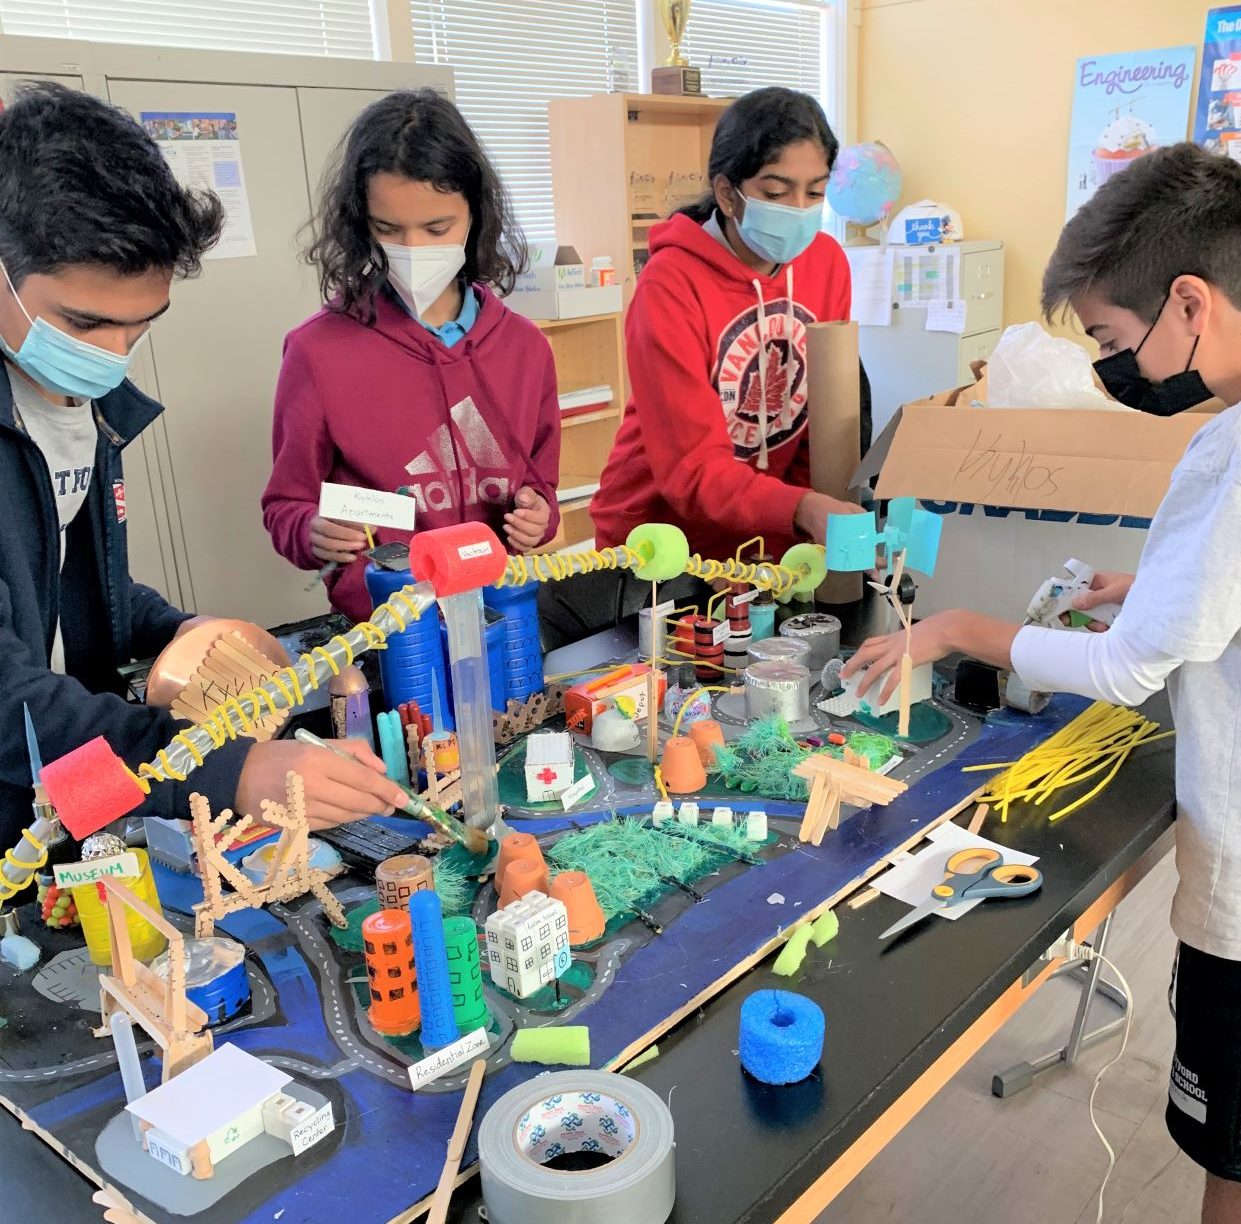 Middle School students design Future Cities, putting STEAM into action